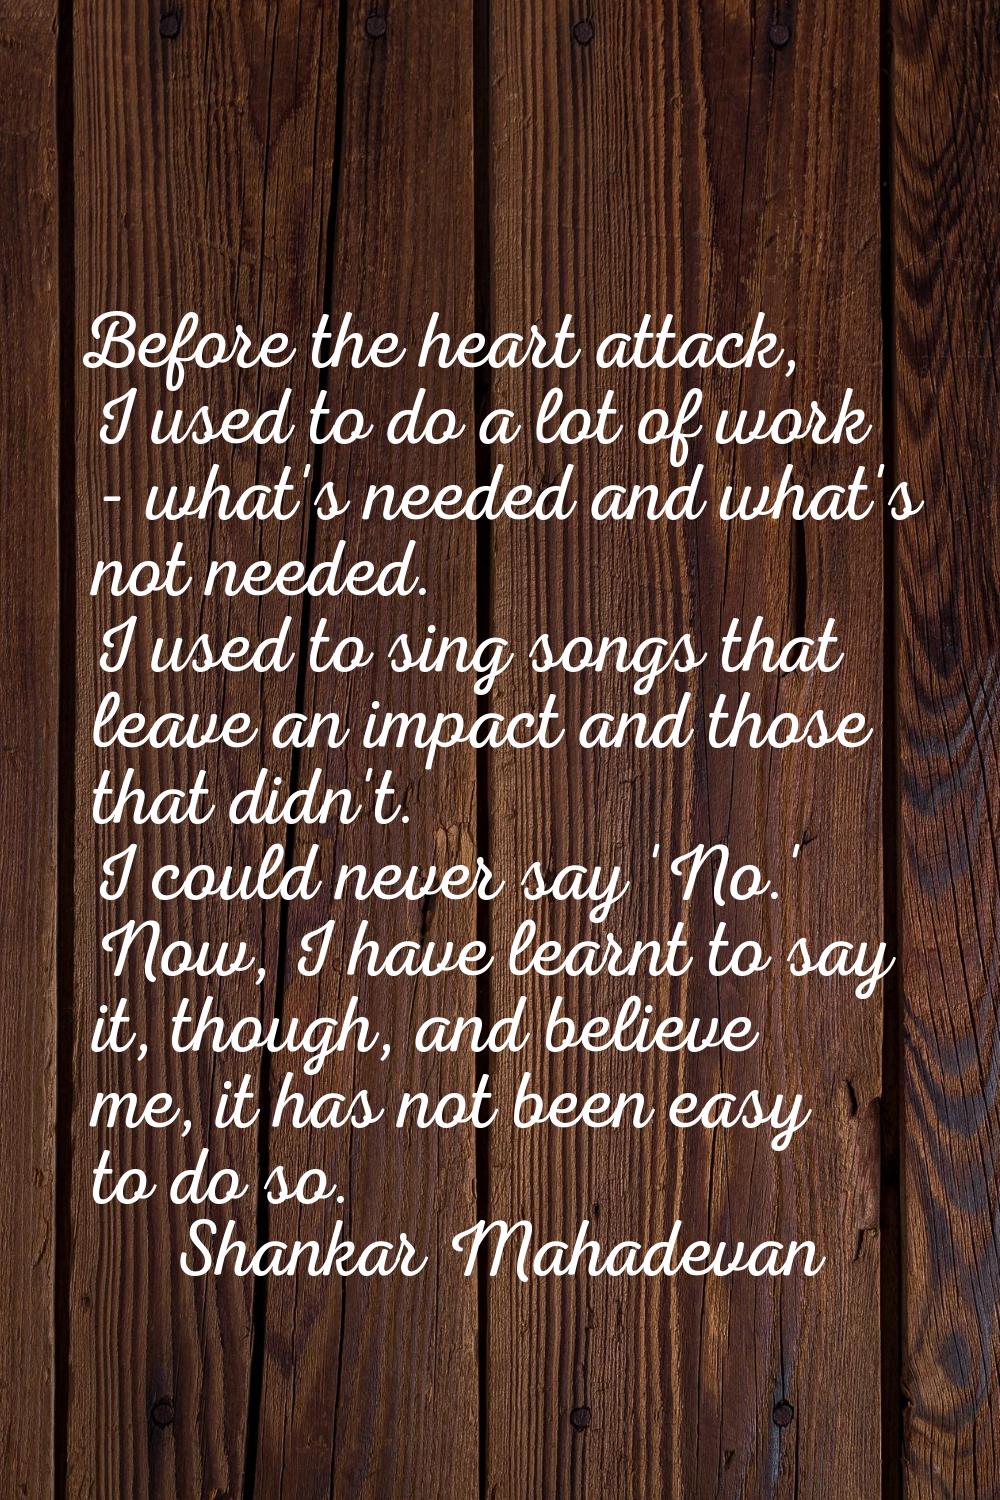 Before the heart attack, I used to do a lot of work - what's needed and what's not needed. I used t